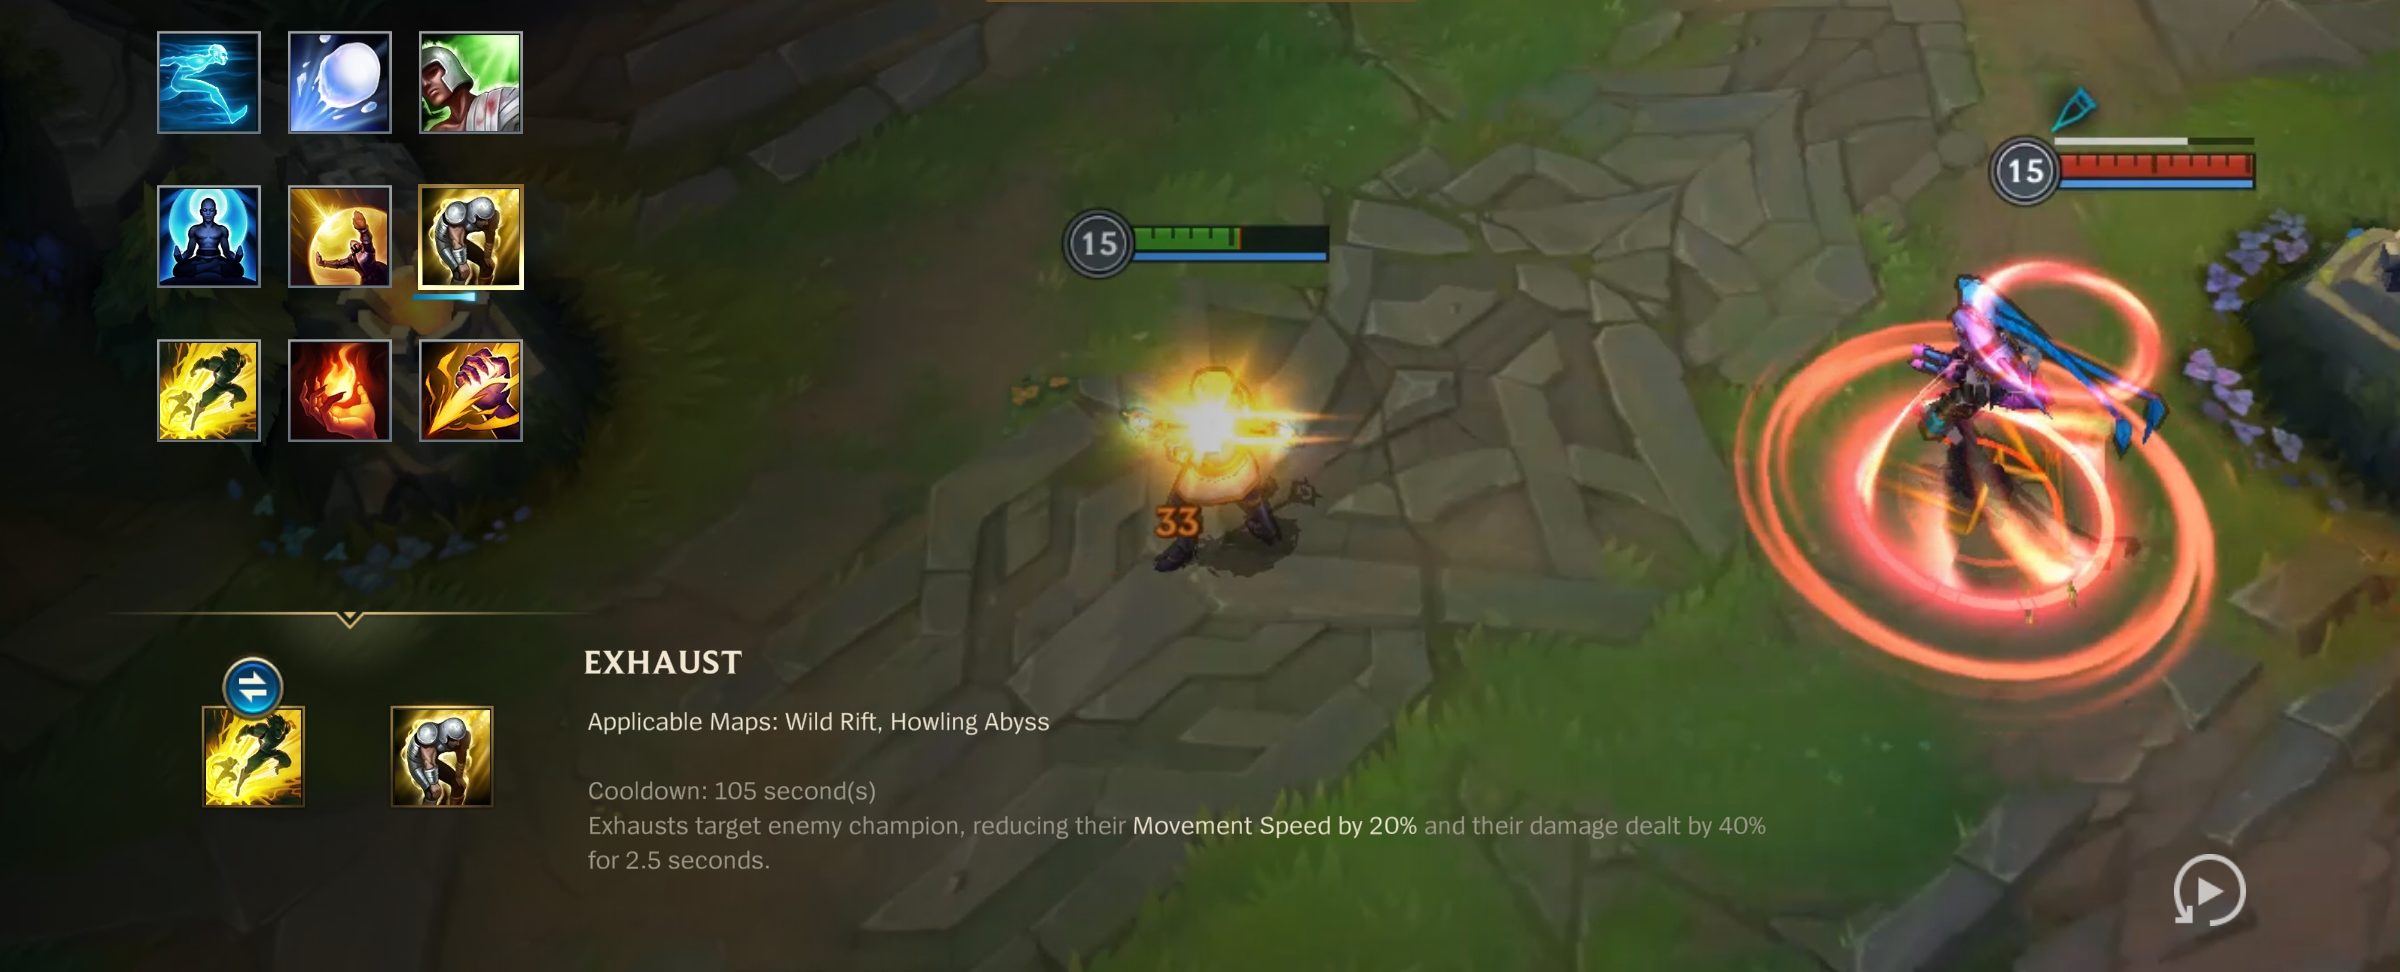 League of Legends: Wild Rift guide – classes, lanes, and items